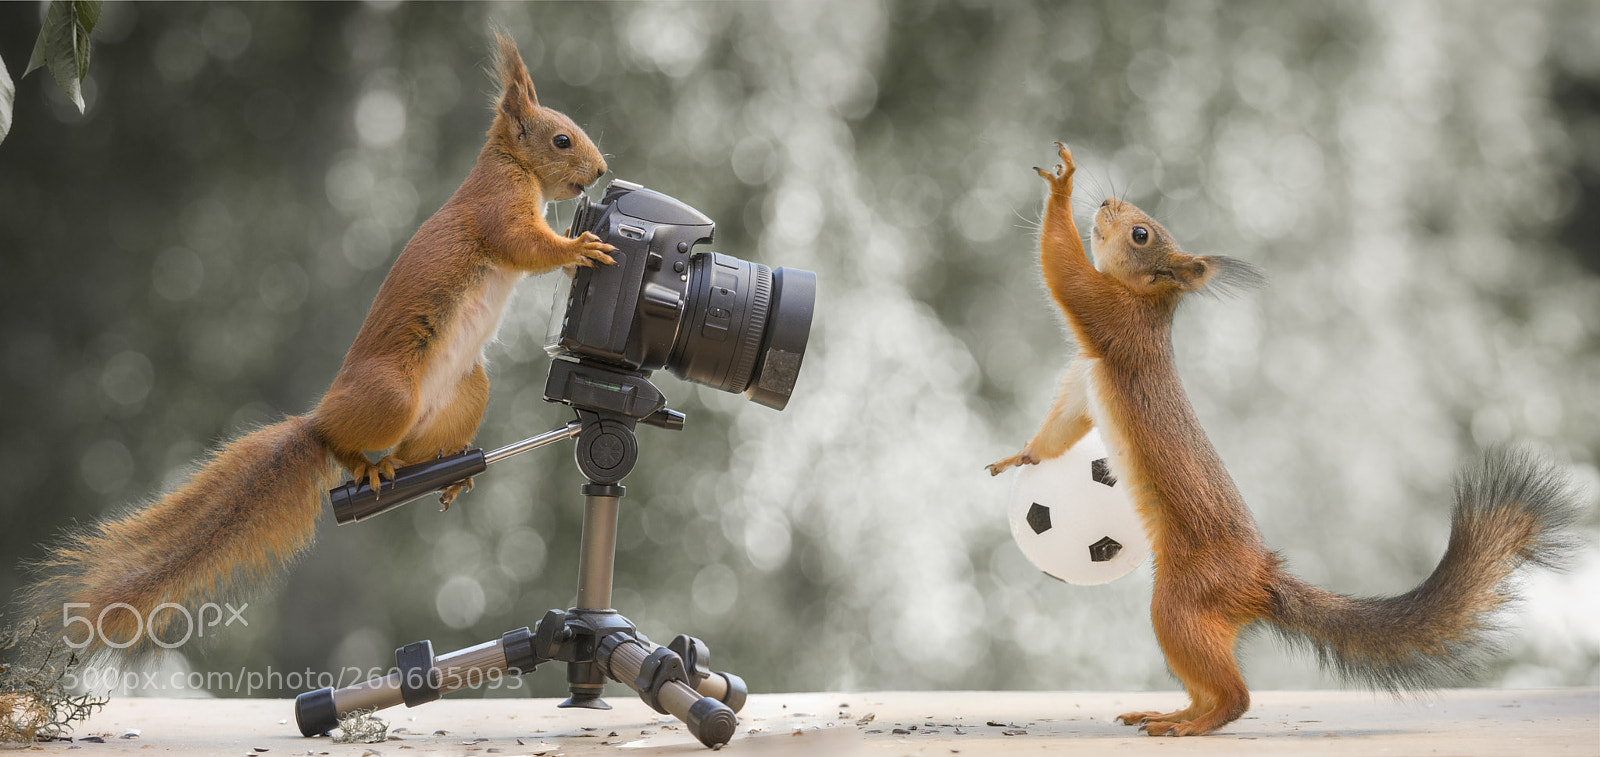 Nikon D810 sample photo. Red squirrels with an photography